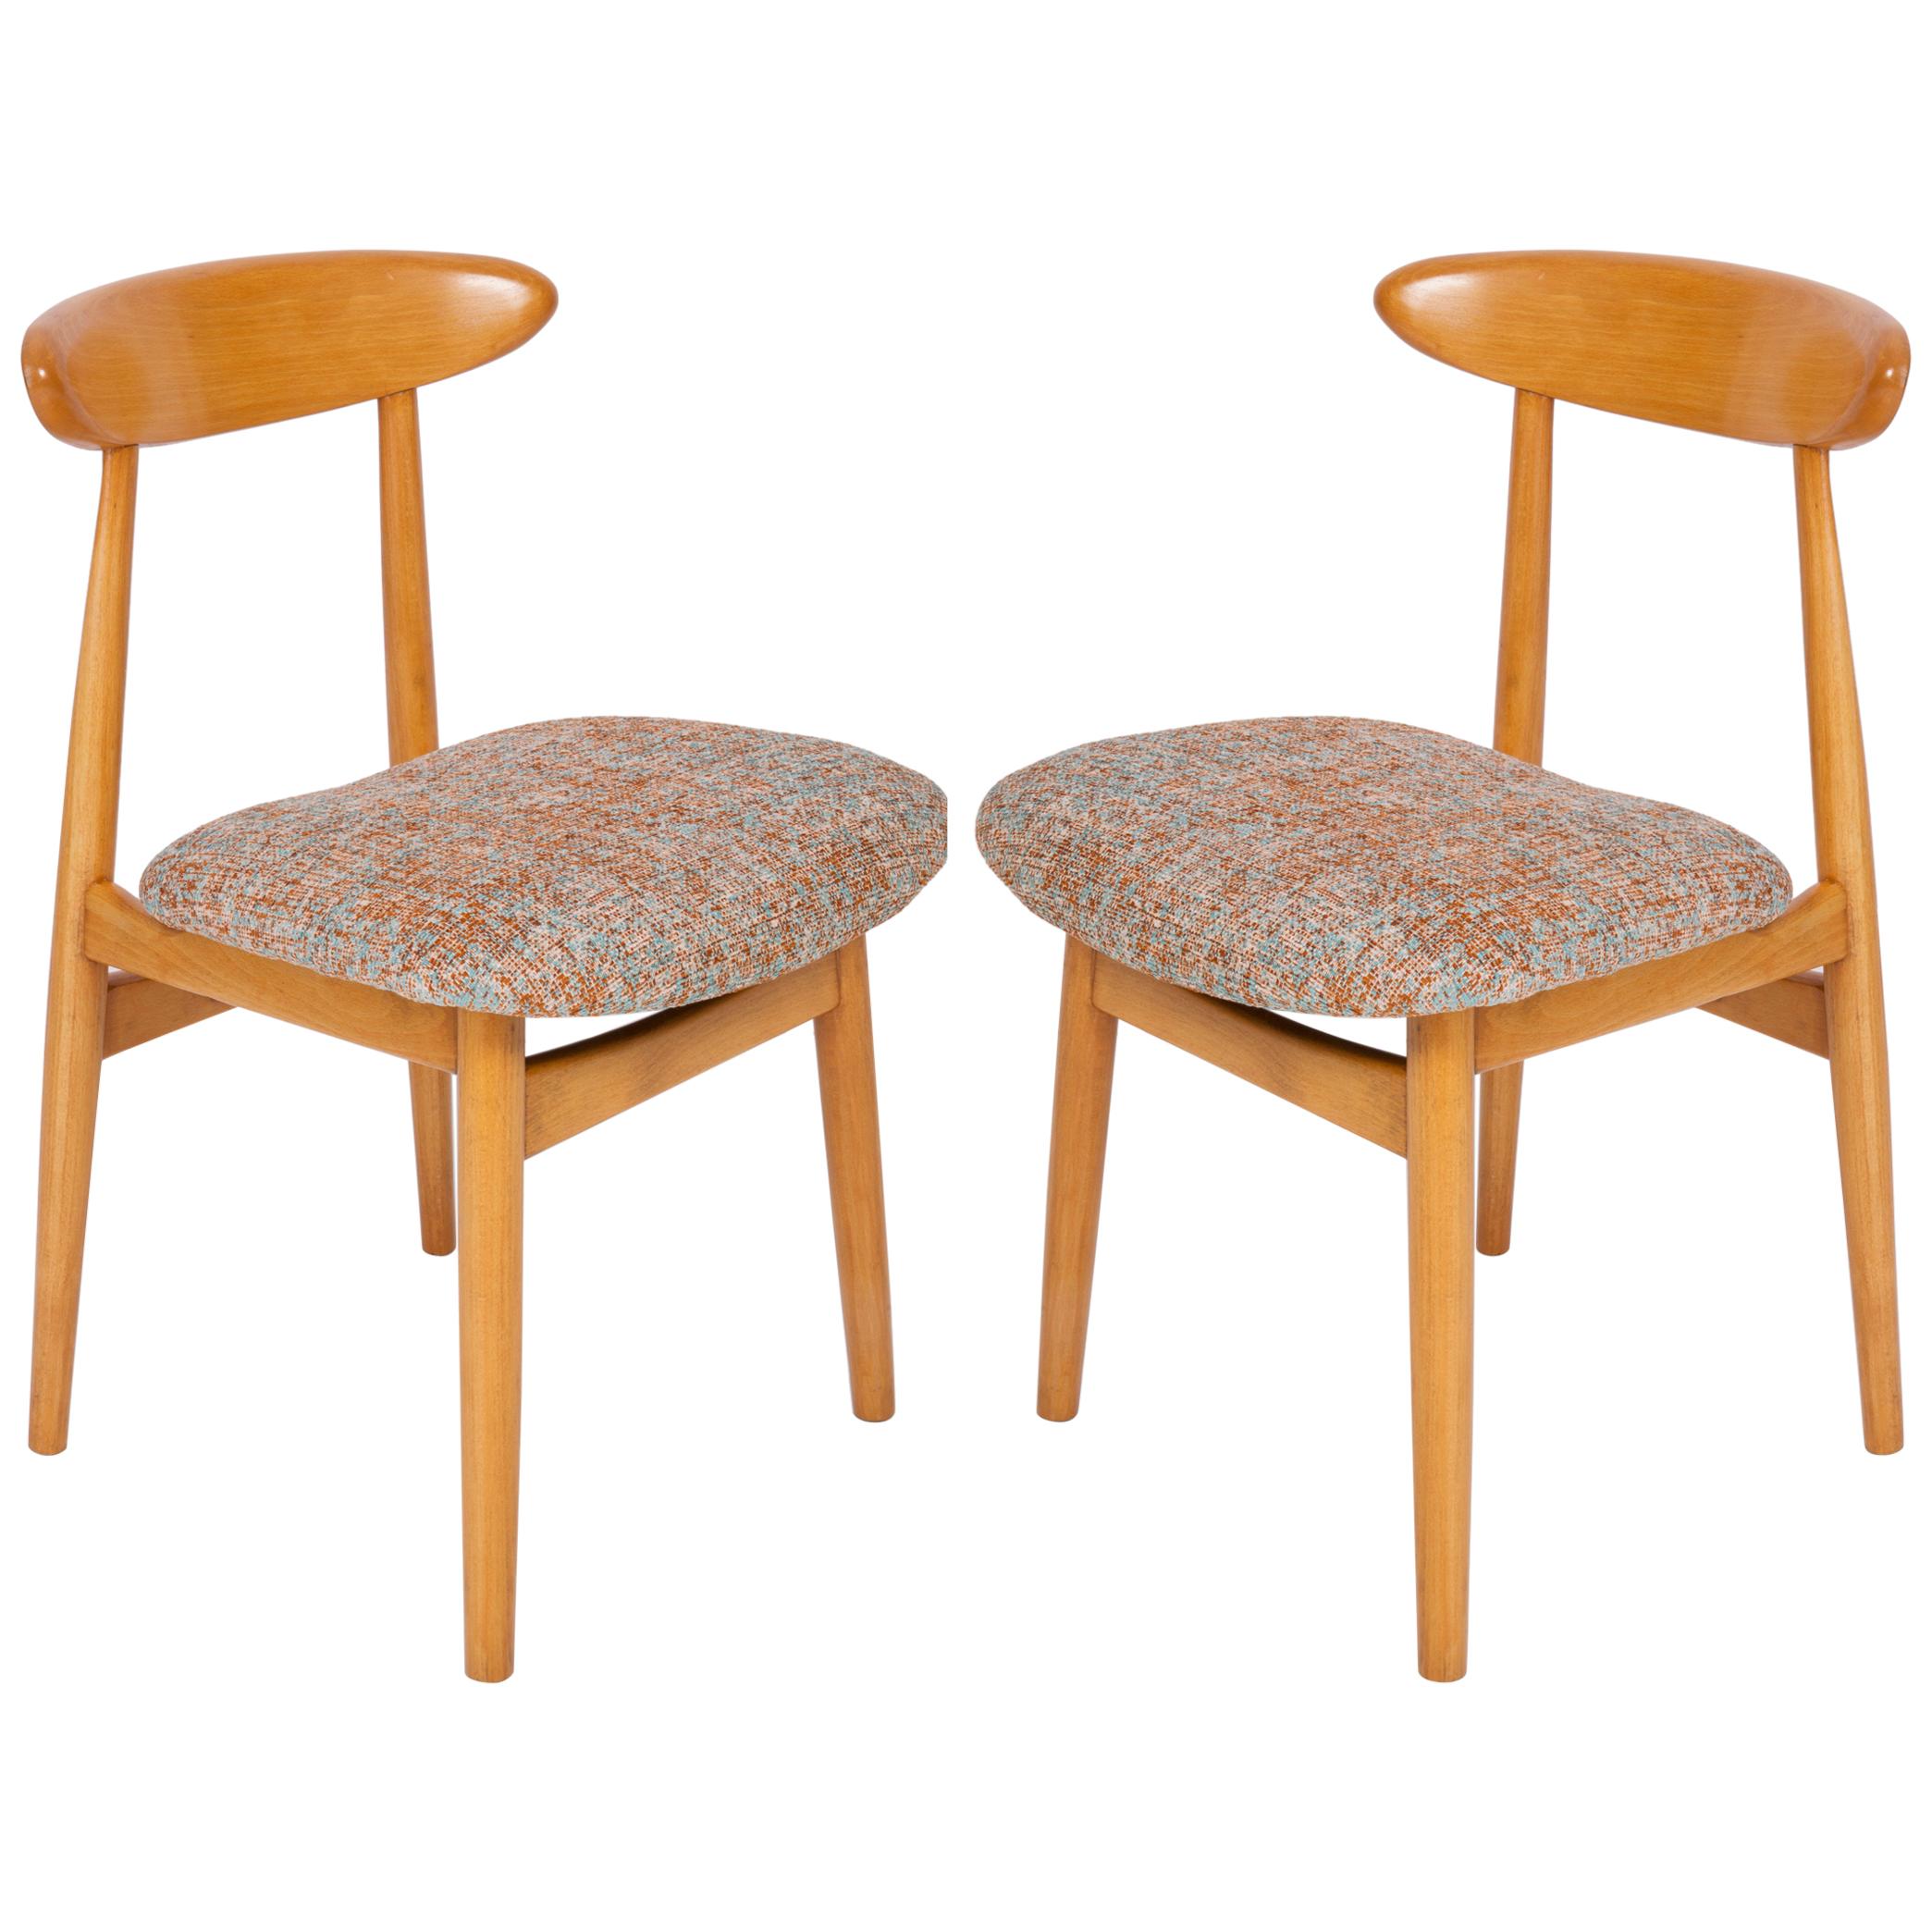 Set of Two Midcentury Black Pixel Dining Chairs, 1960s